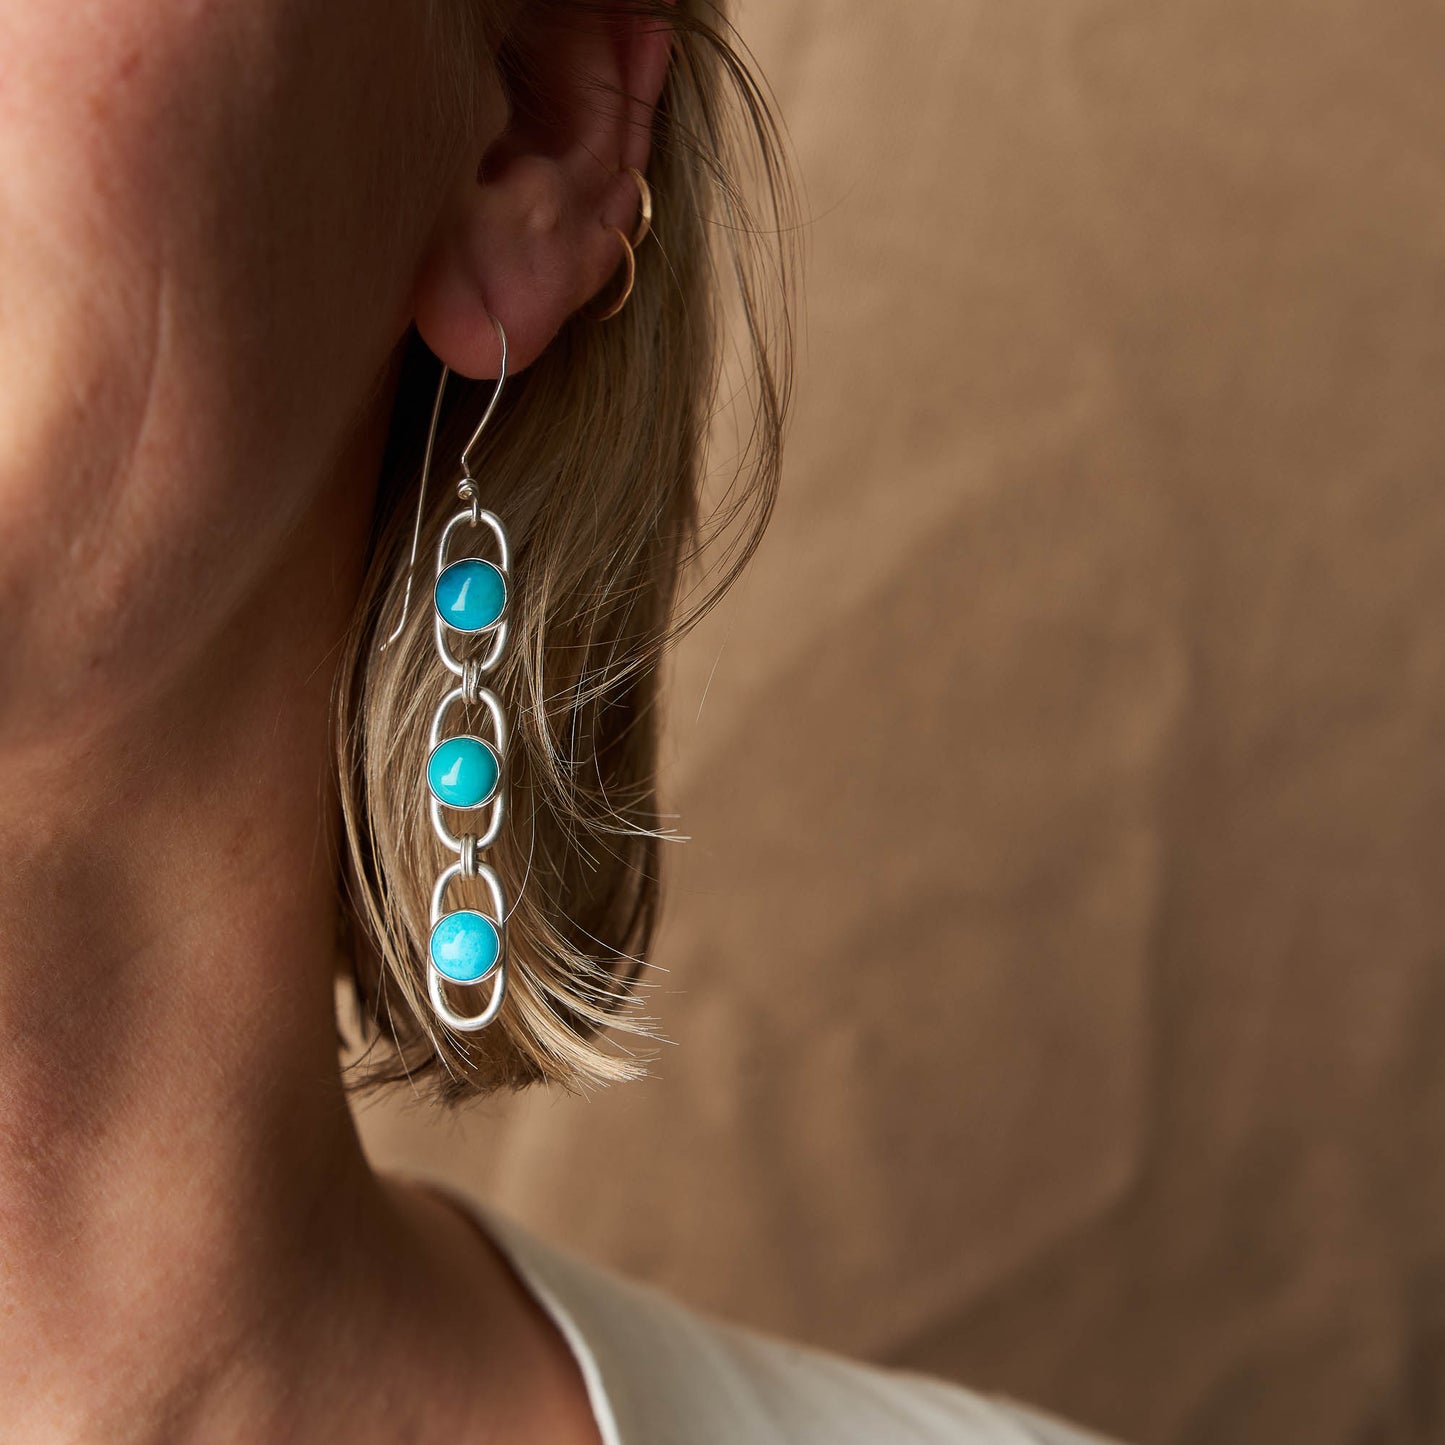 Trickle Earrings :: Turquoise Trio